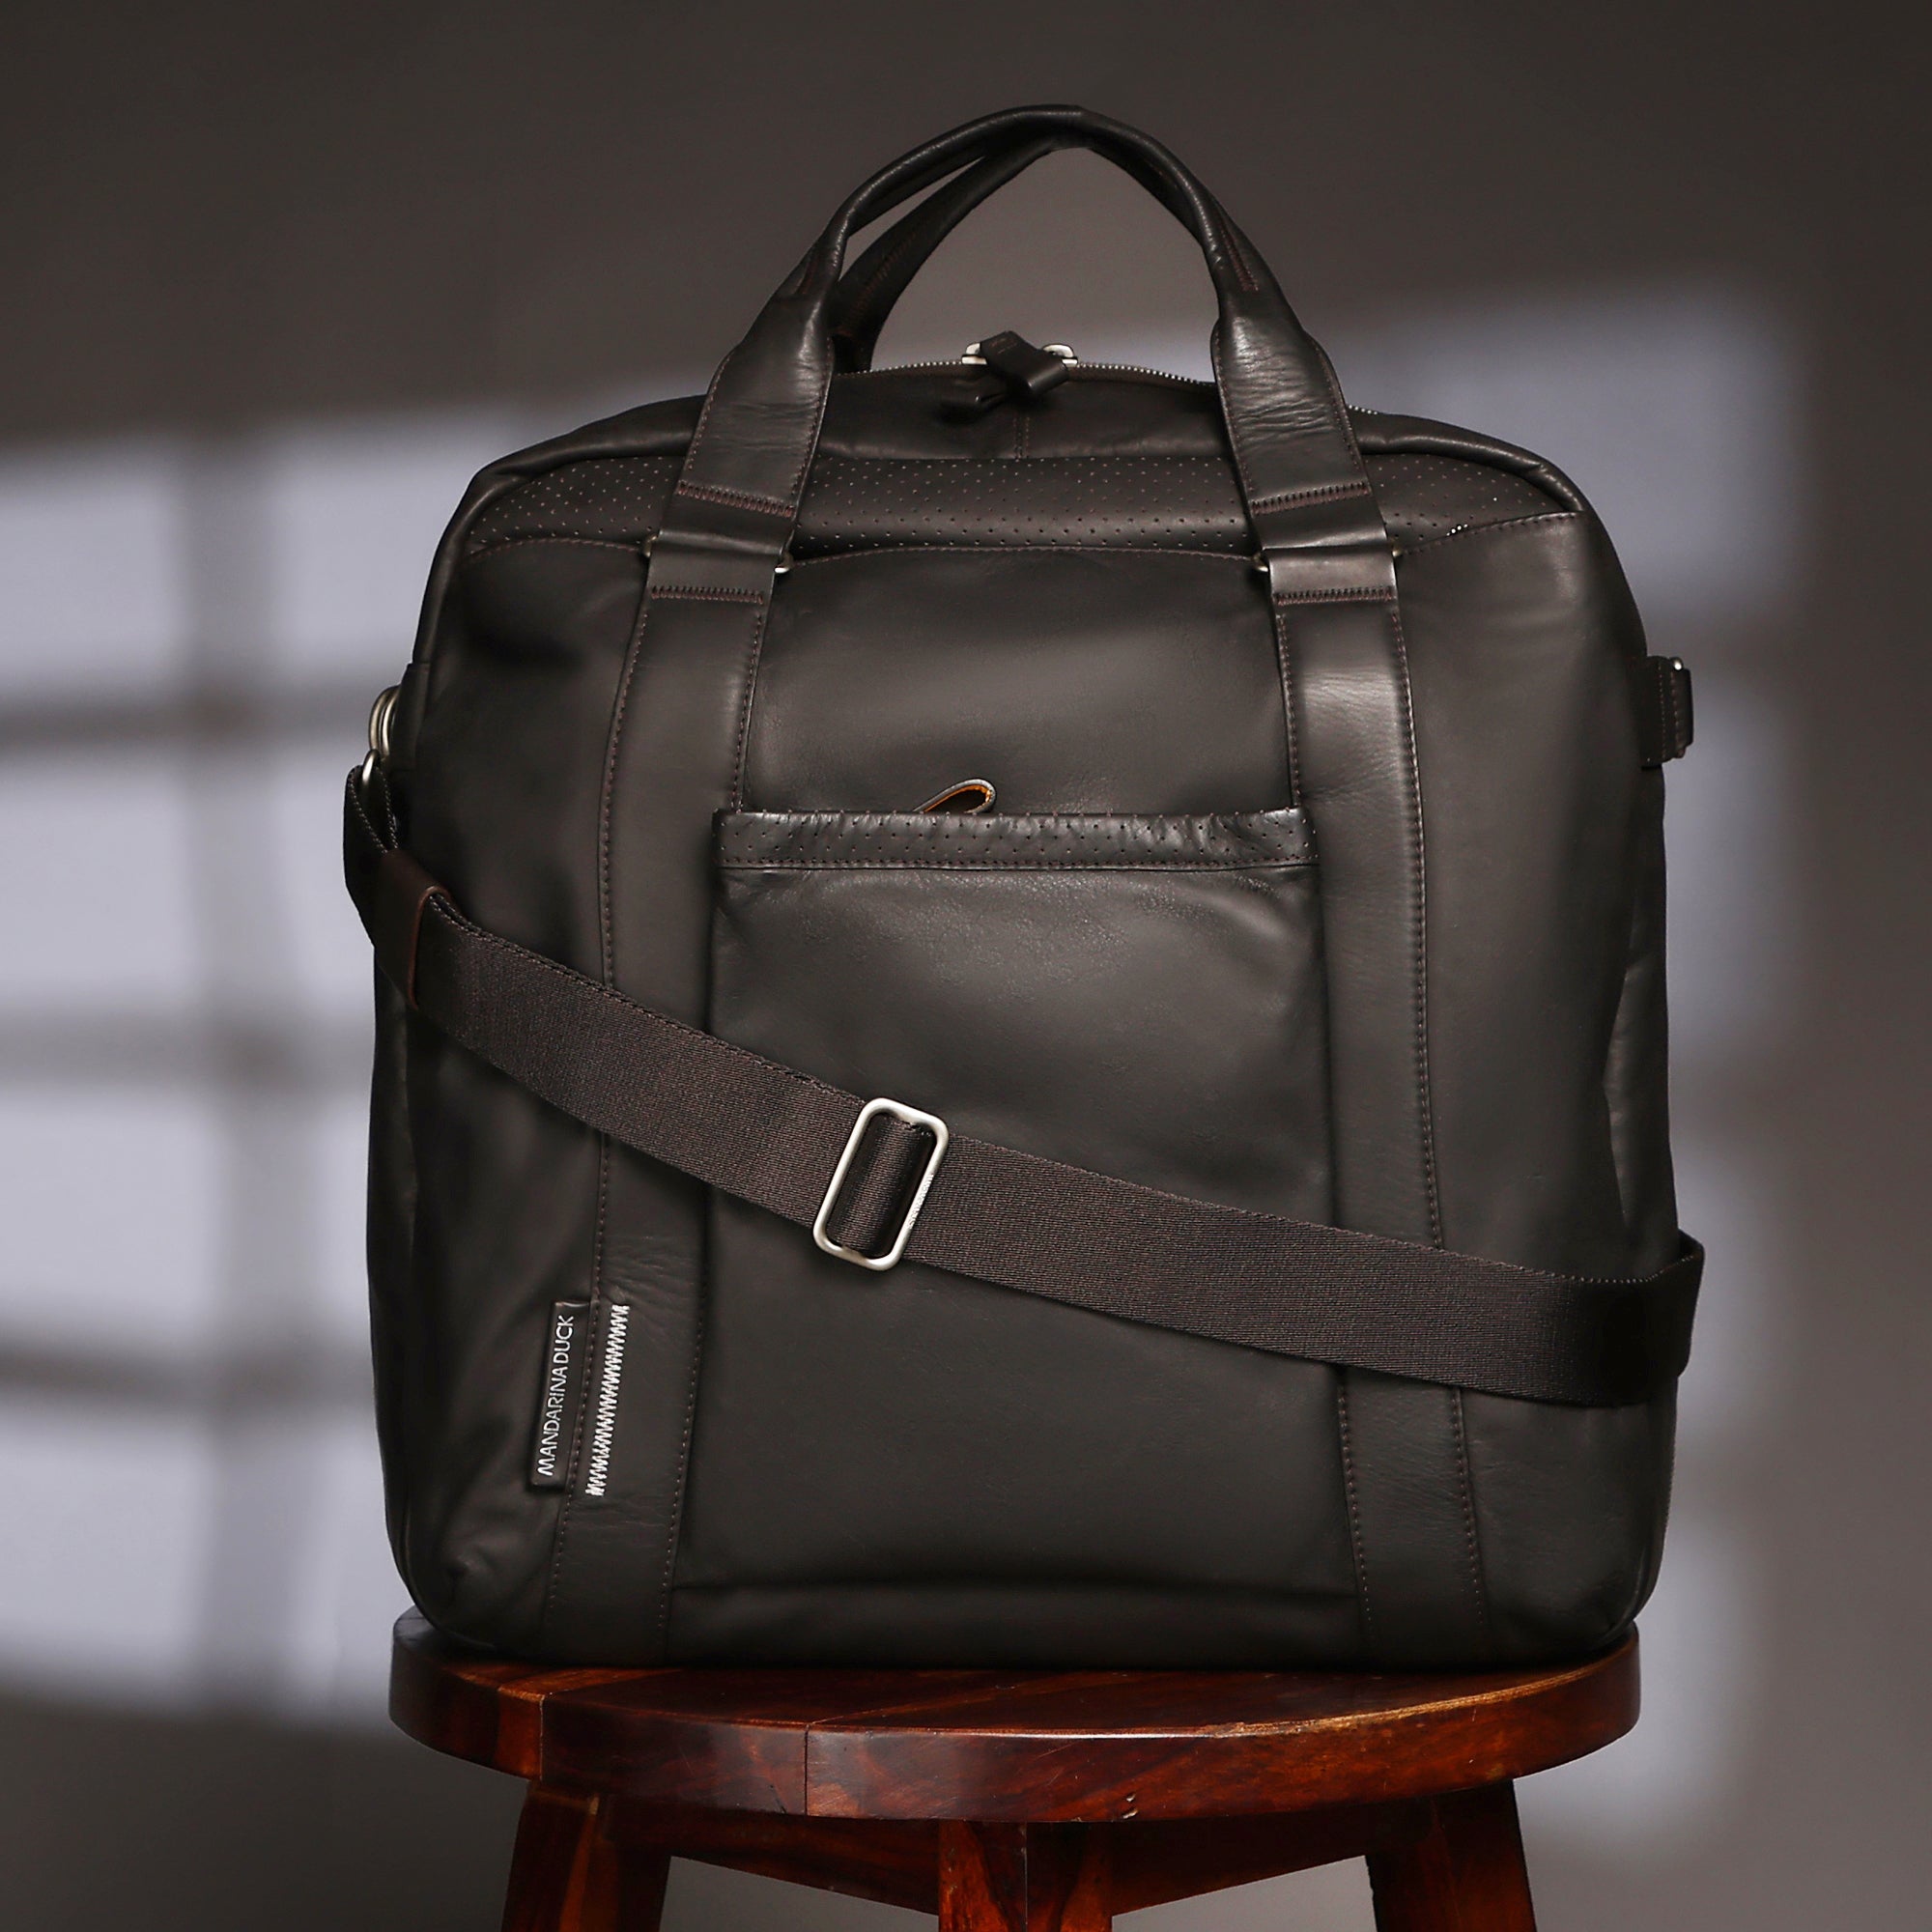 Grace Collection Limited Edition Genuine Leather Black Cabin Luggage Bag - Mandarina Duck